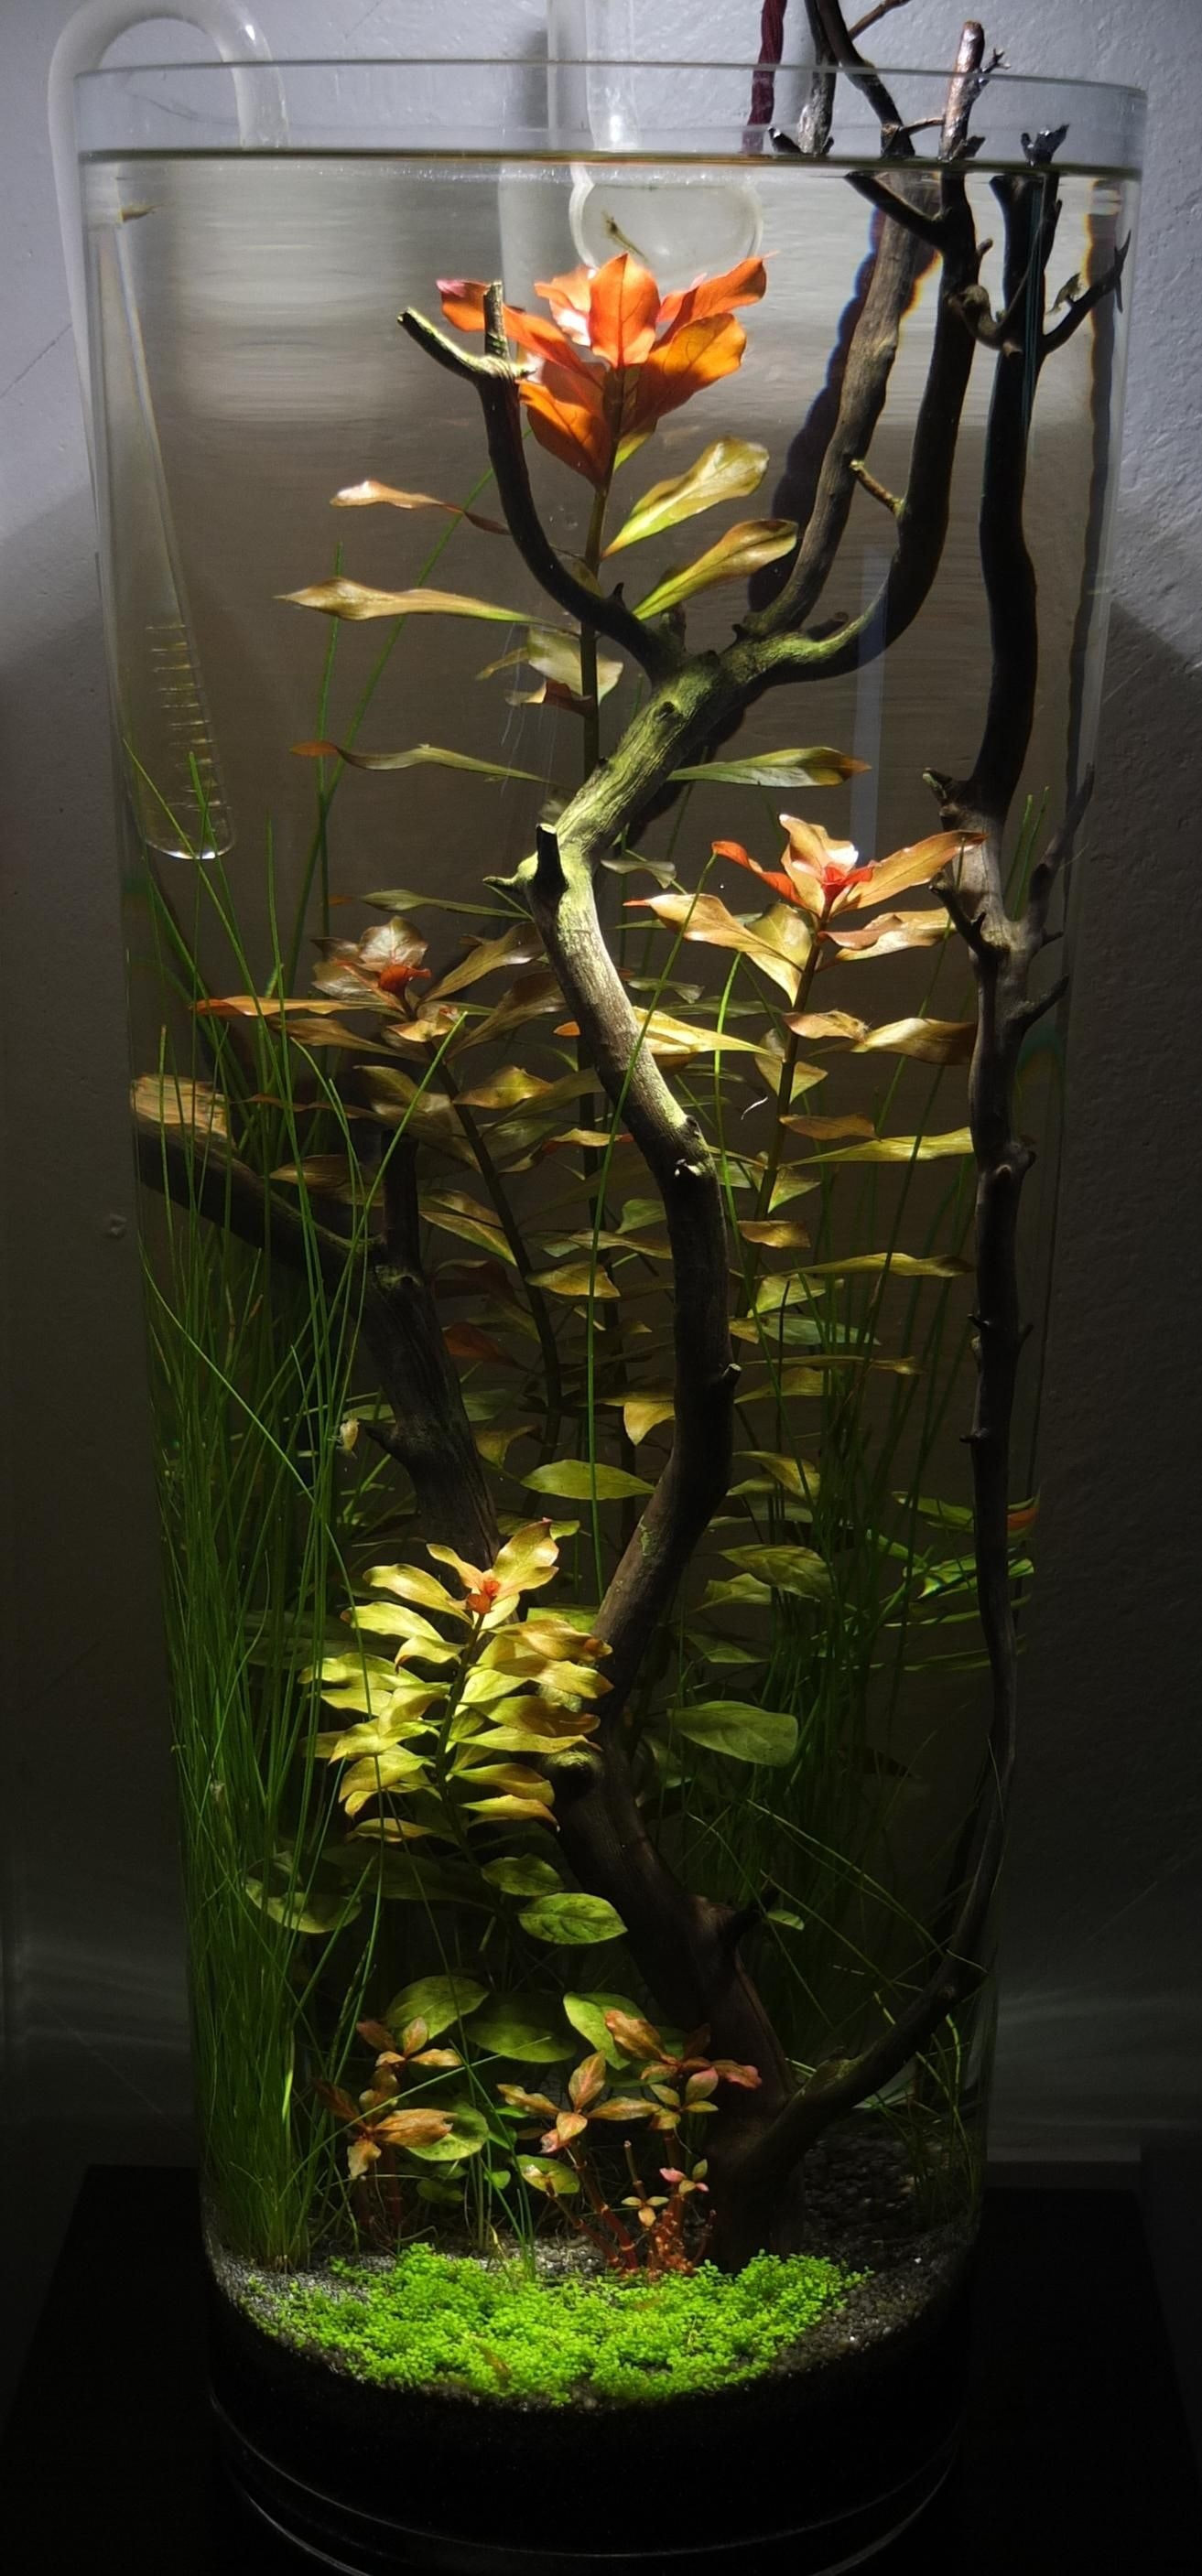 13 Amazing Plants for Betta Vase 2024 free download plants for betta vase of fish in vase gallery cool fish to buy inspirational vases fish tank in cool fish to buy inspirational vases fish tank vase are friendsi 0d